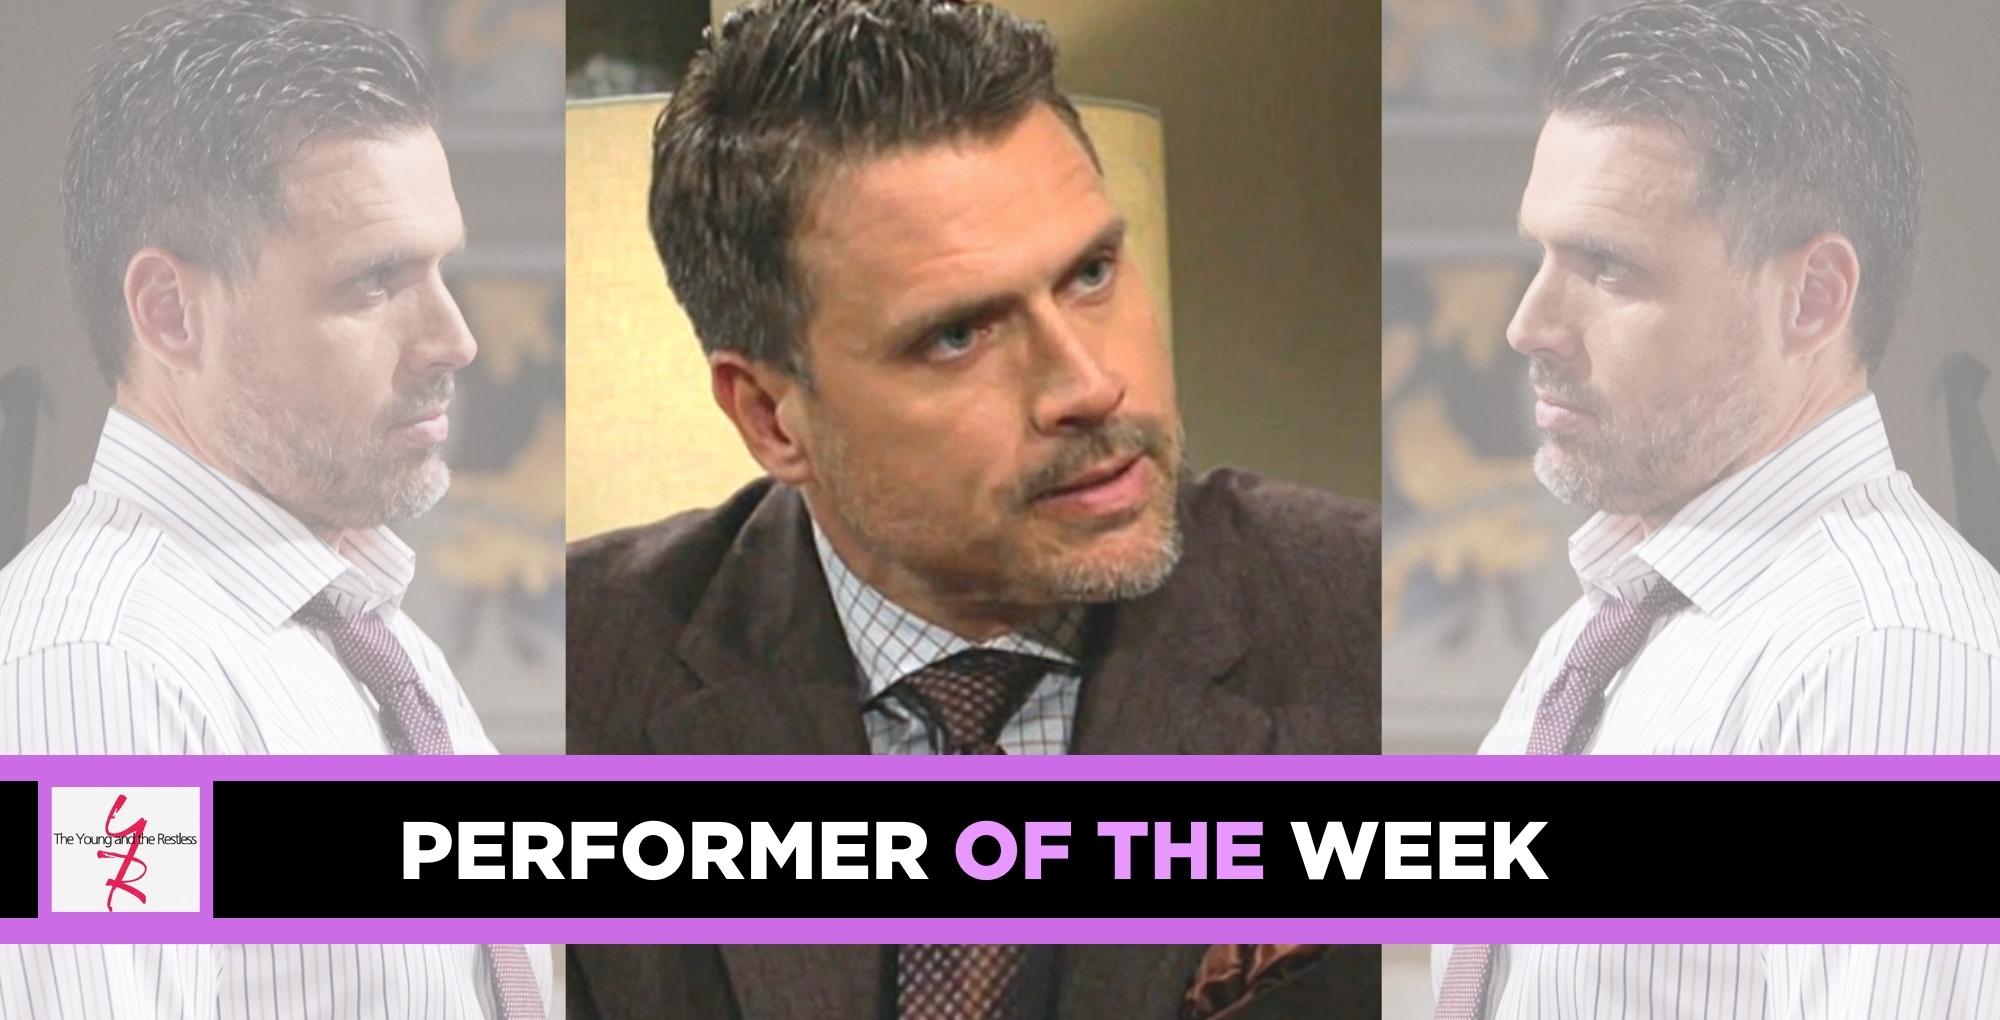 joshua morrow shined as nick newman on the young and the restless this week.